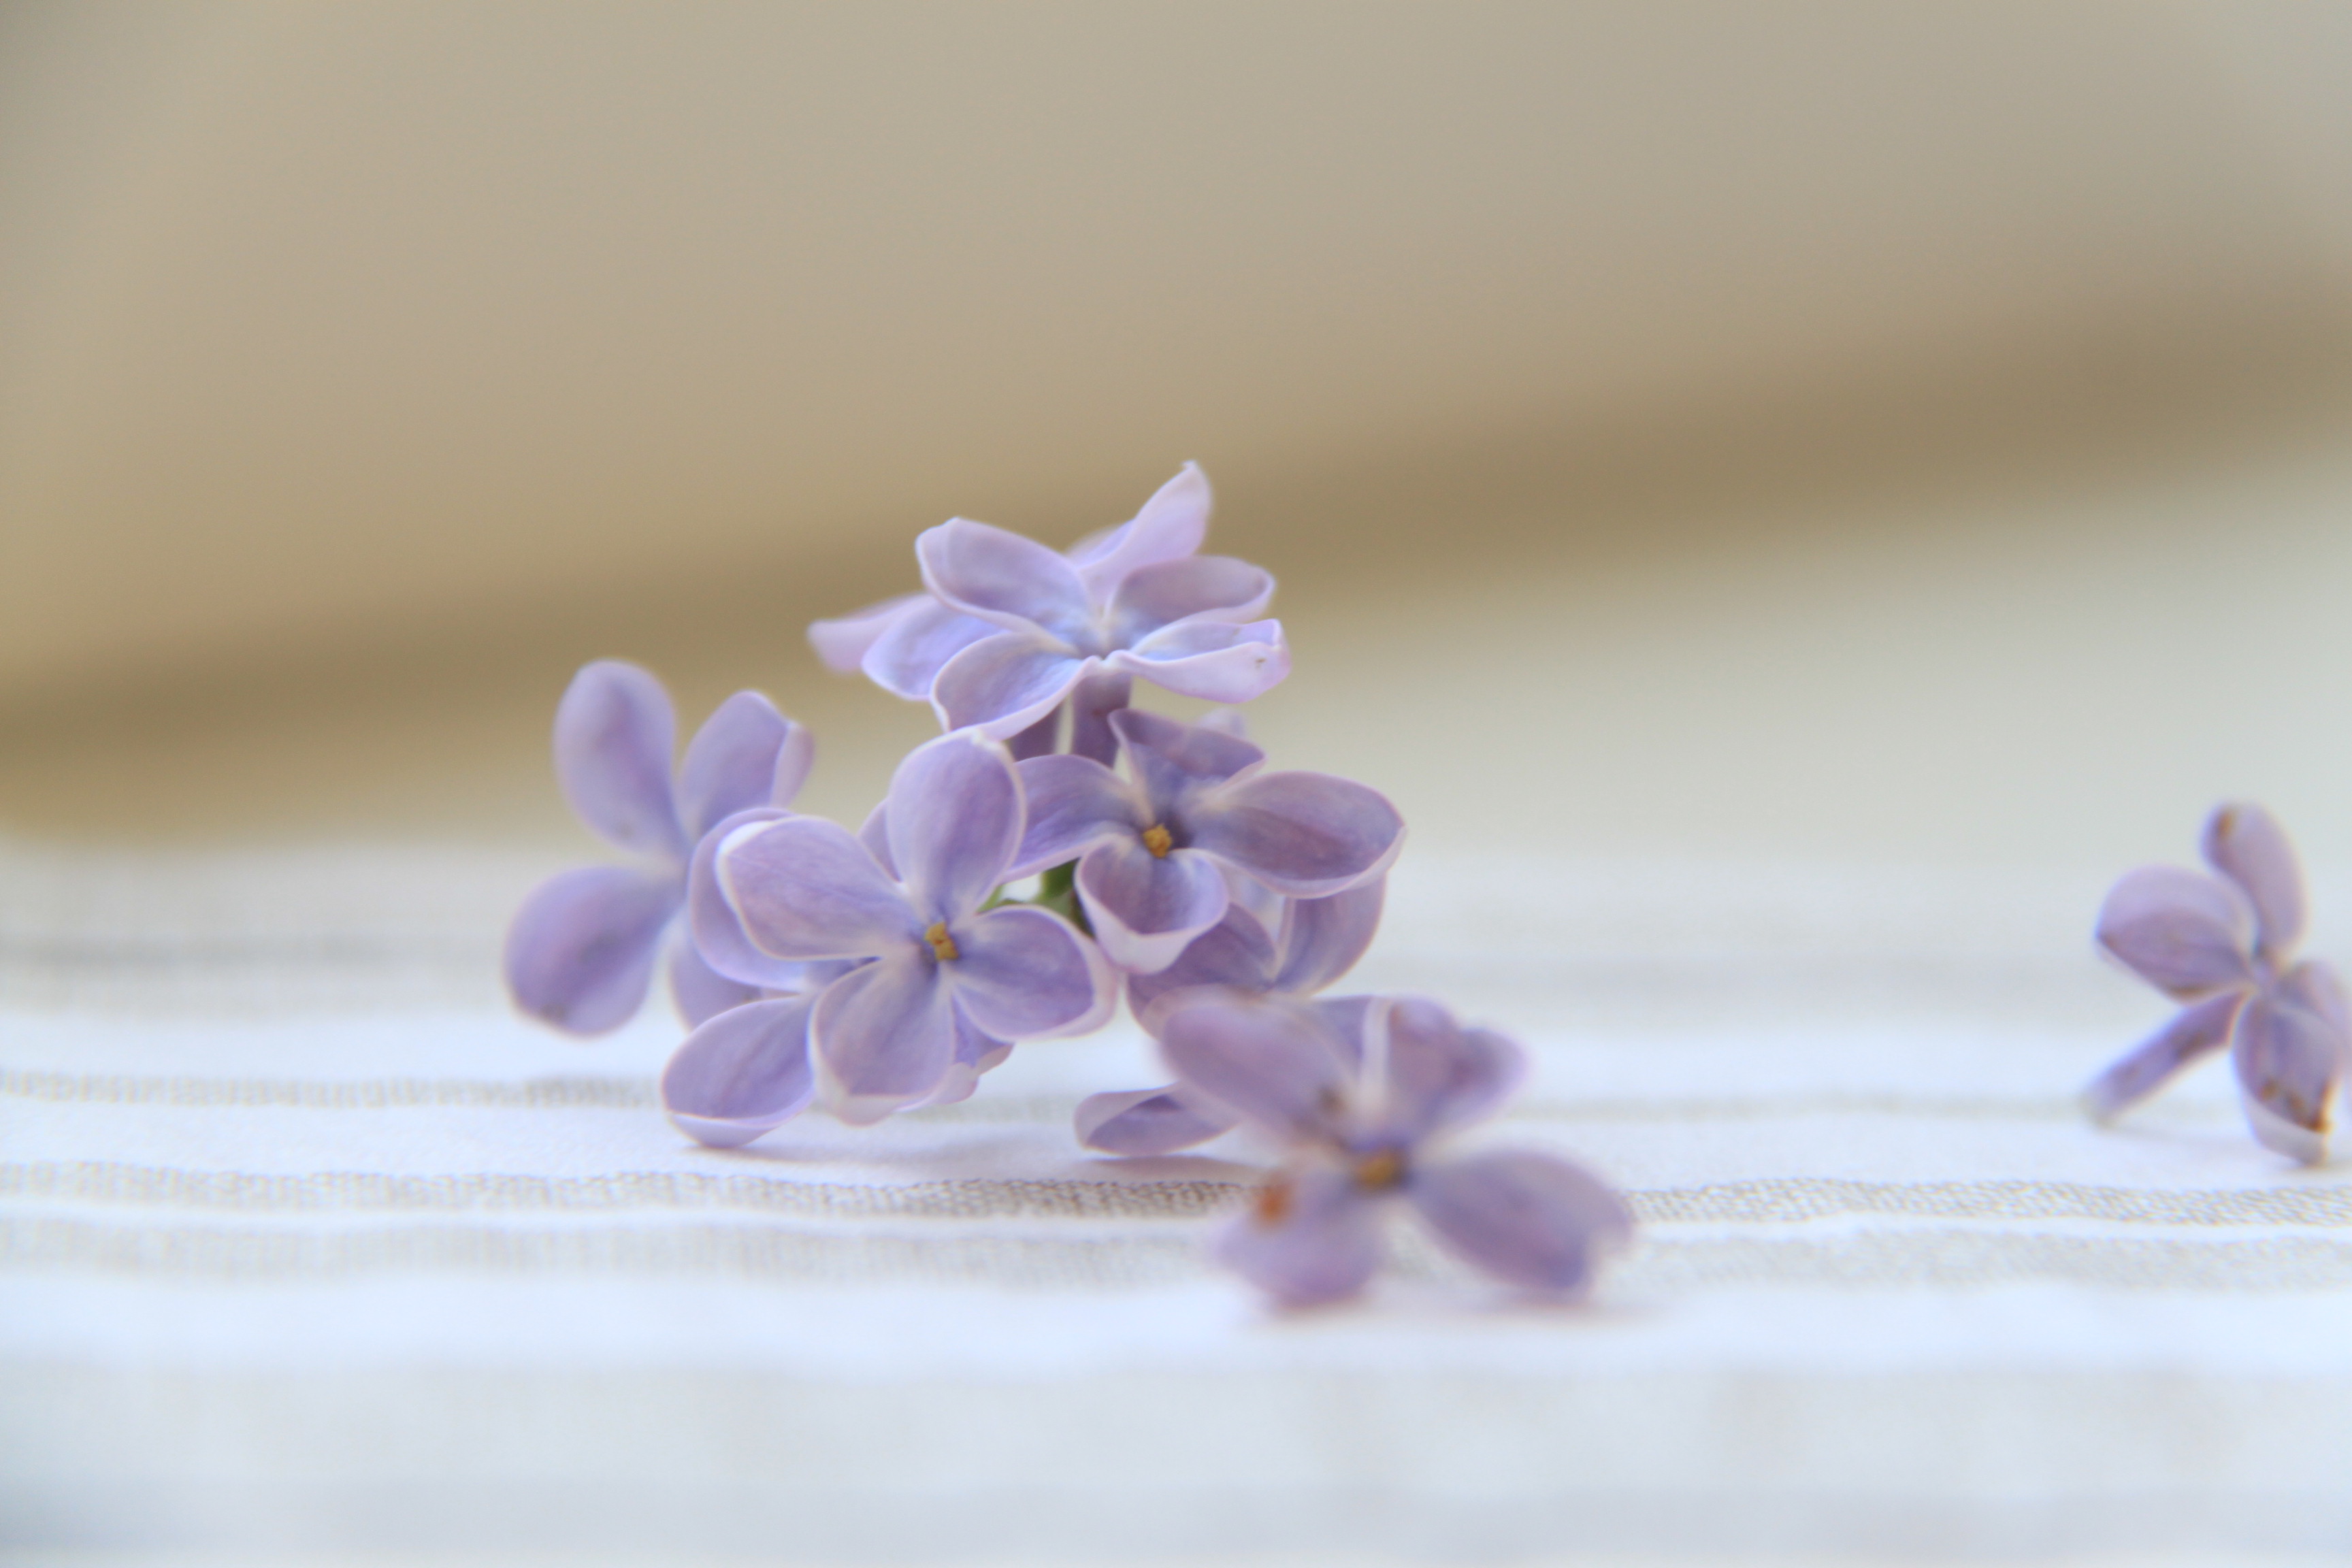 The lilac photo